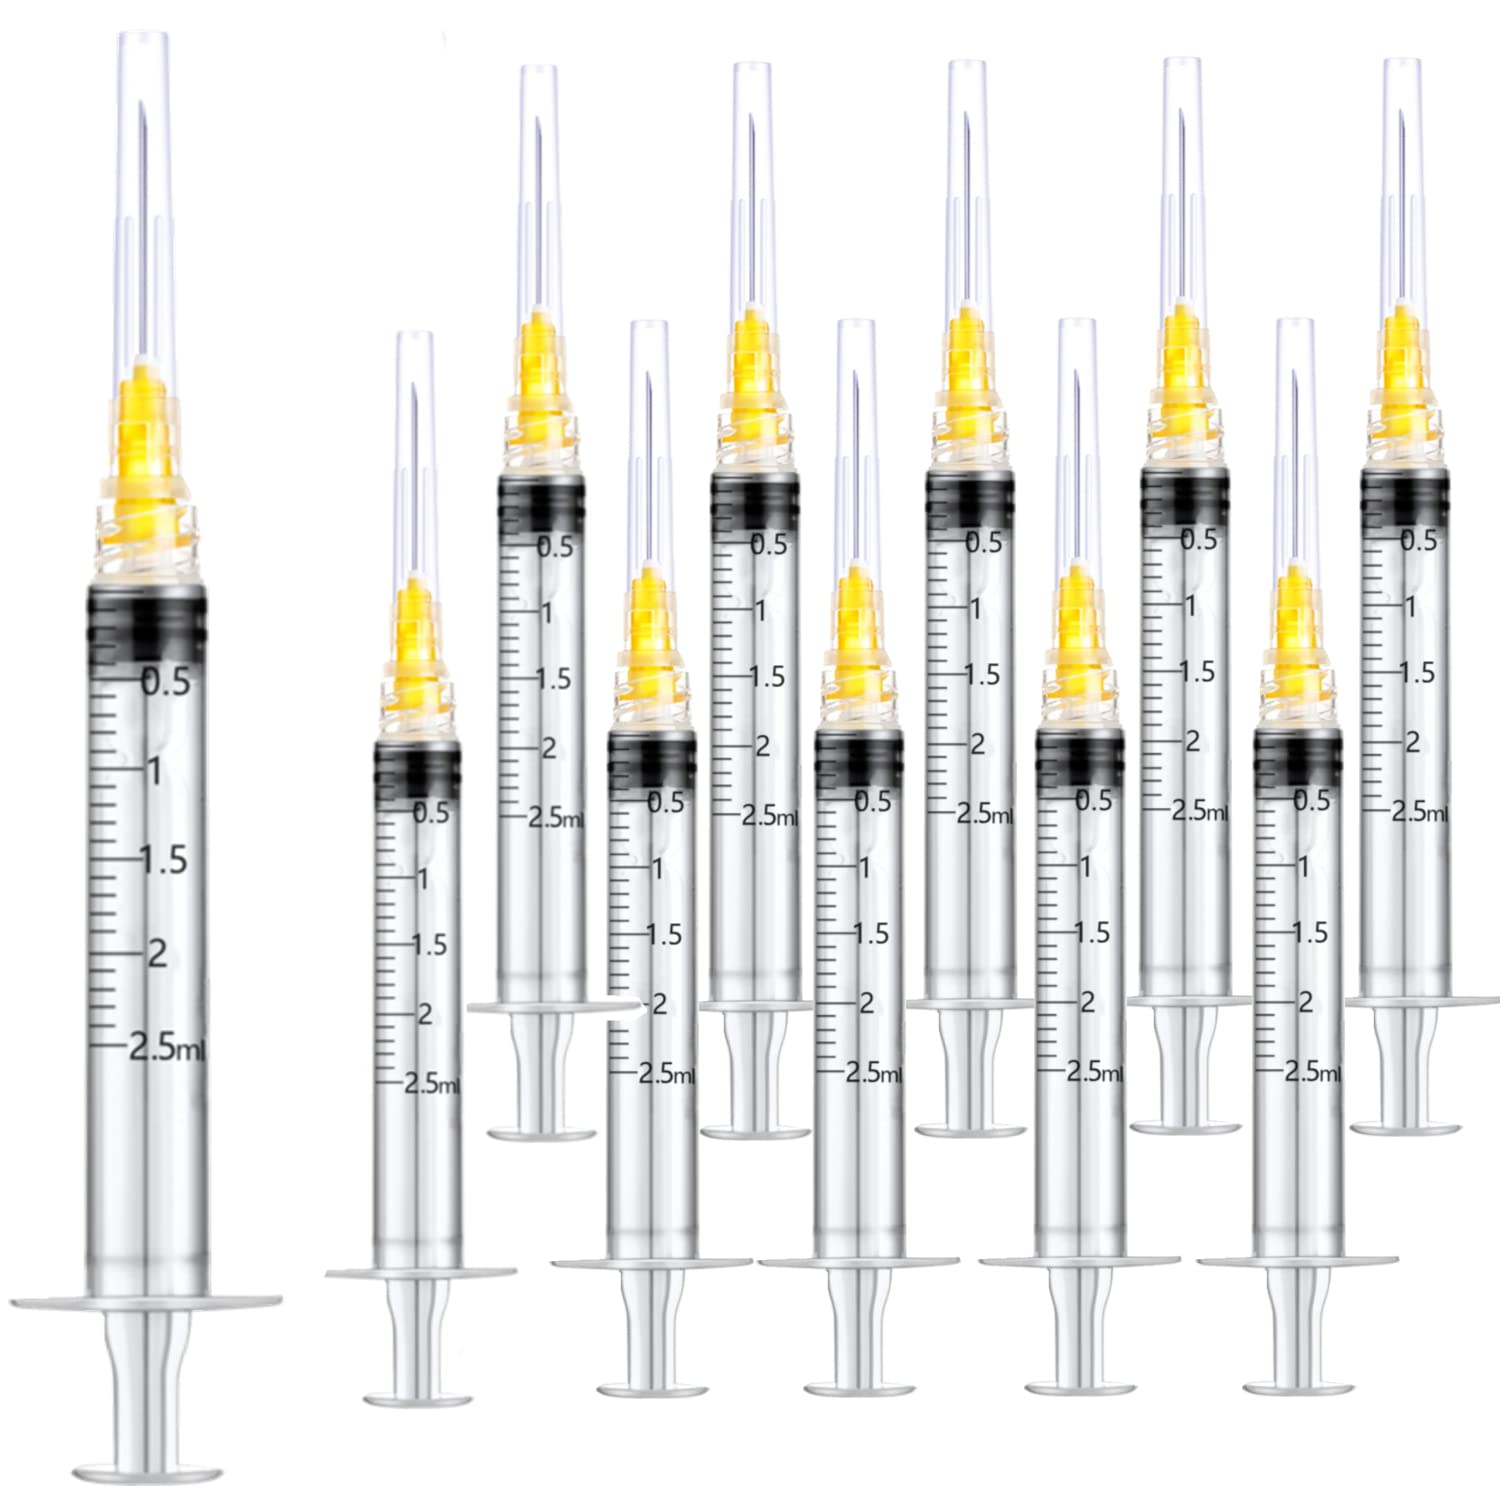 15 Pack 2.5ml 25Ga Plastic Syringe with Measurement for Scientific Labs and Industrial Dispensing, Disposable Individually Wrapped (15, 2.5ml-25Ga)